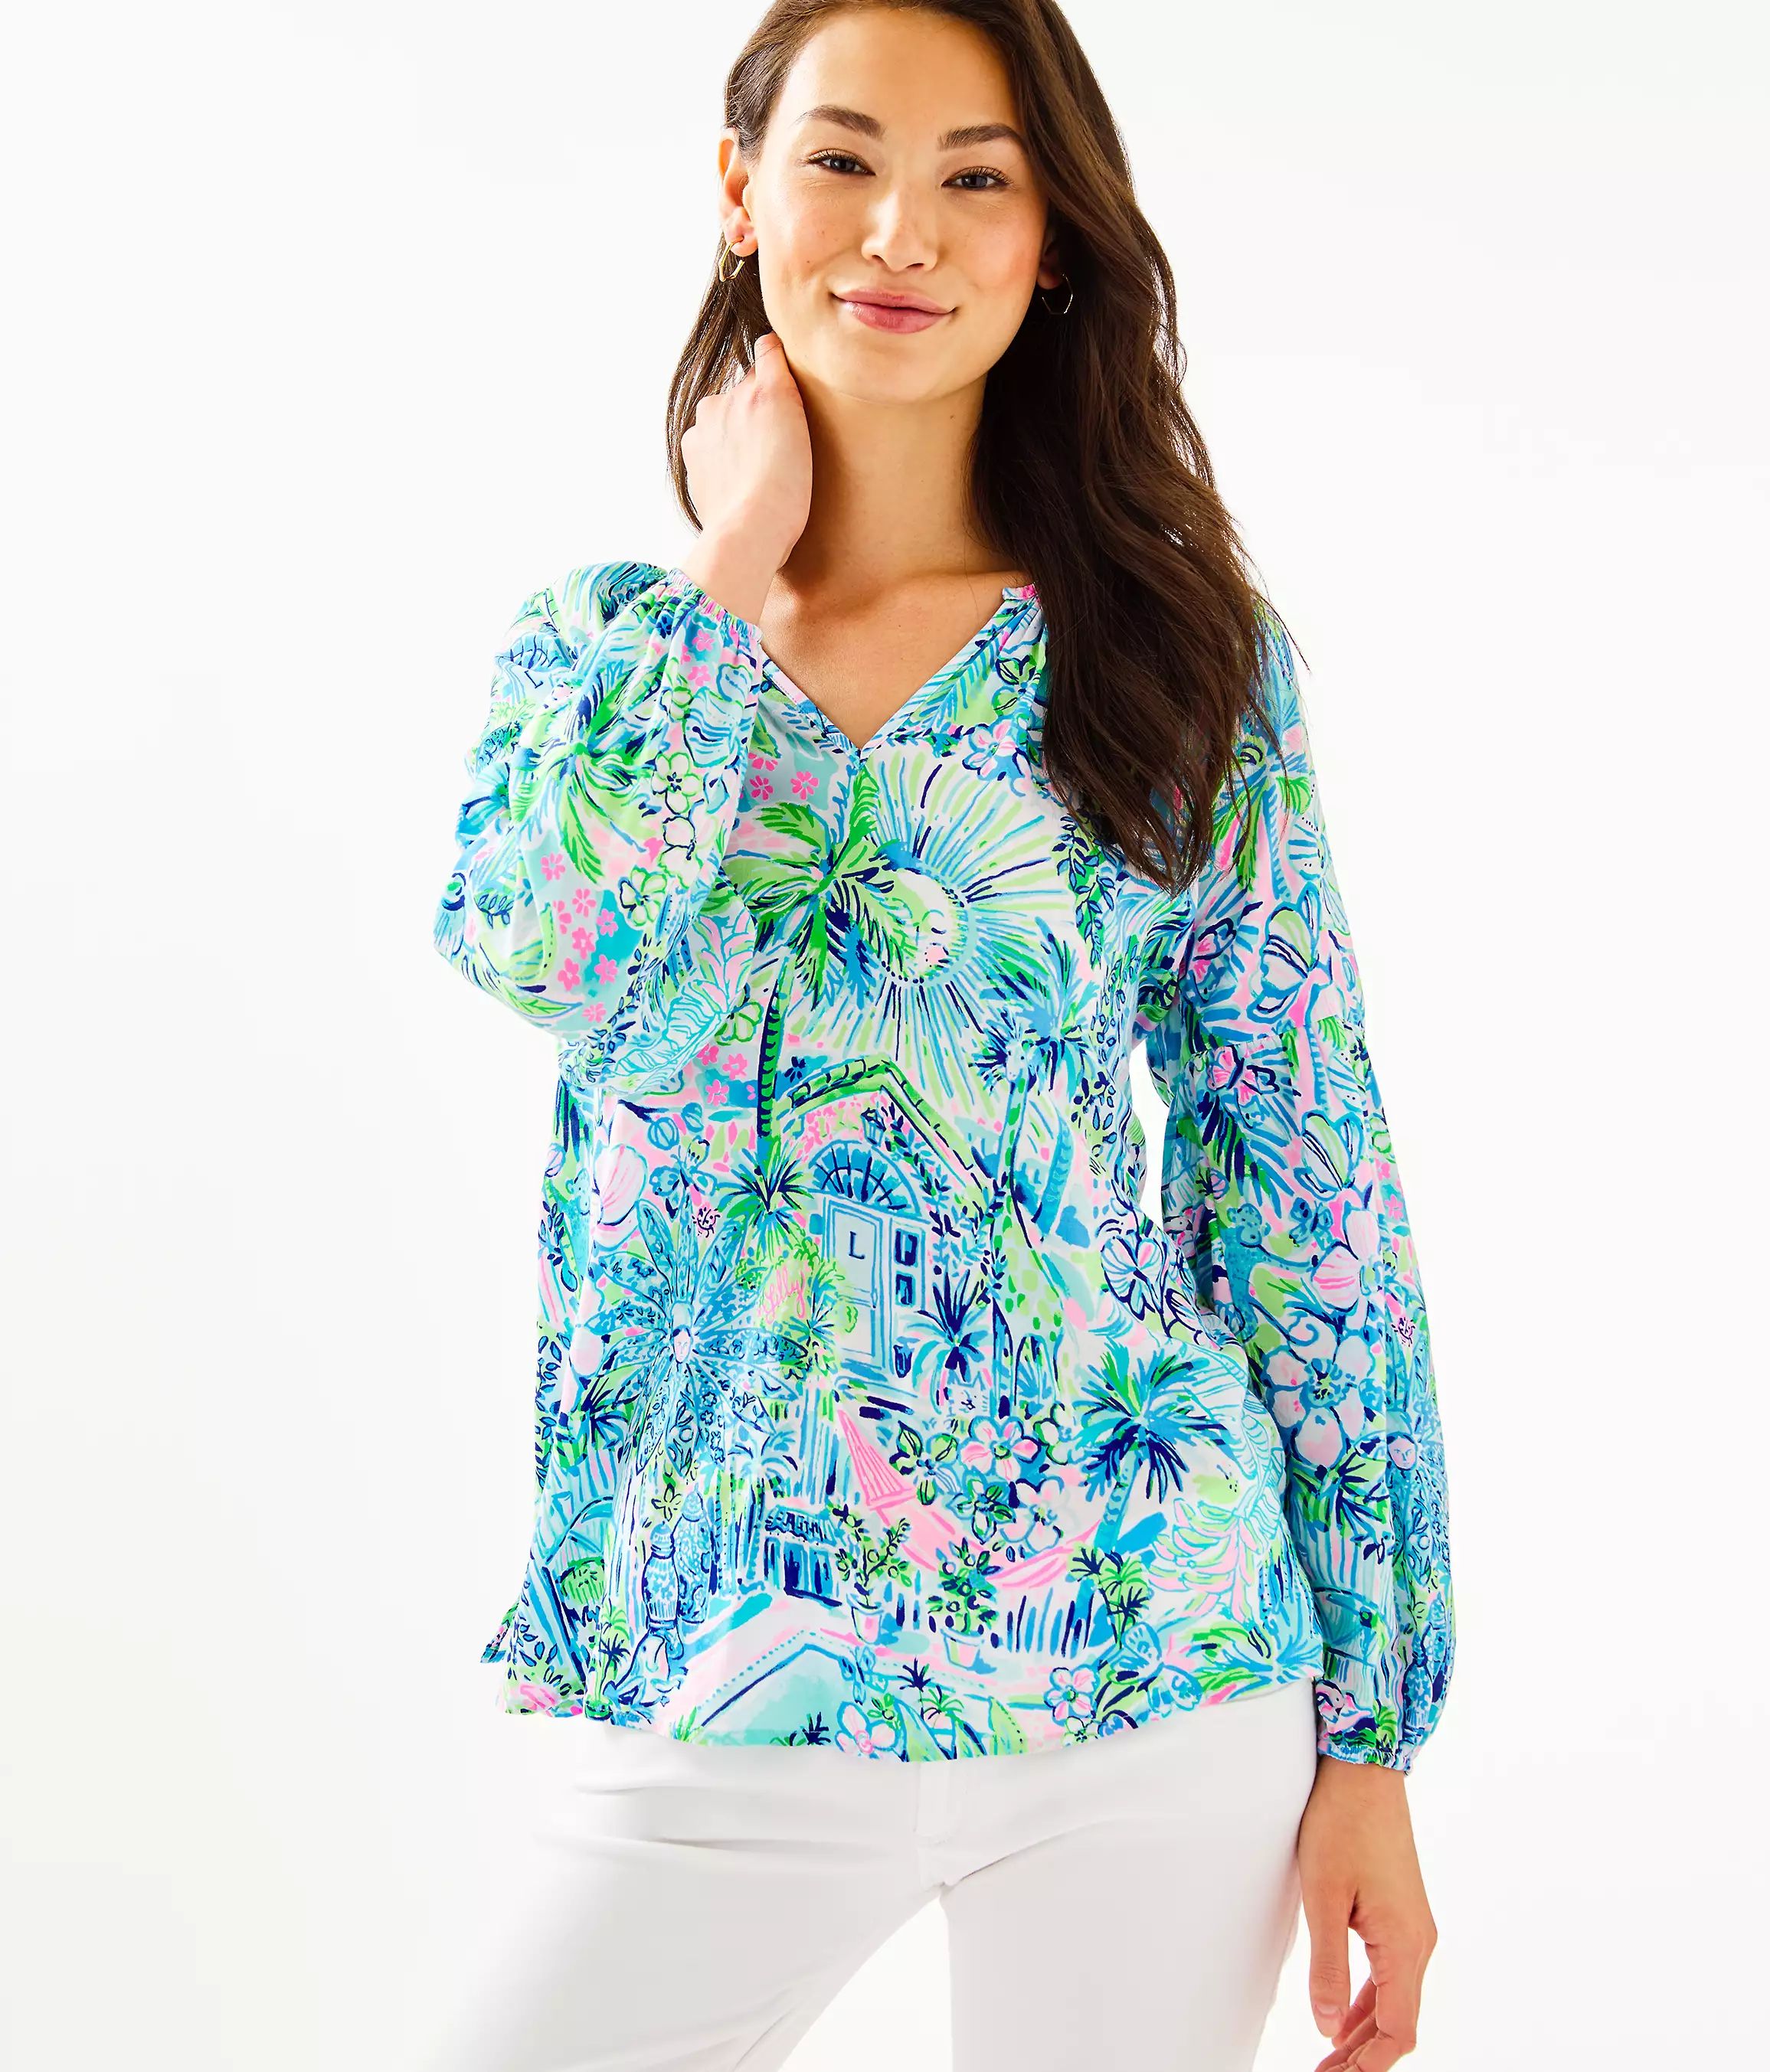 Winsley Top | Lilly Pulitzer